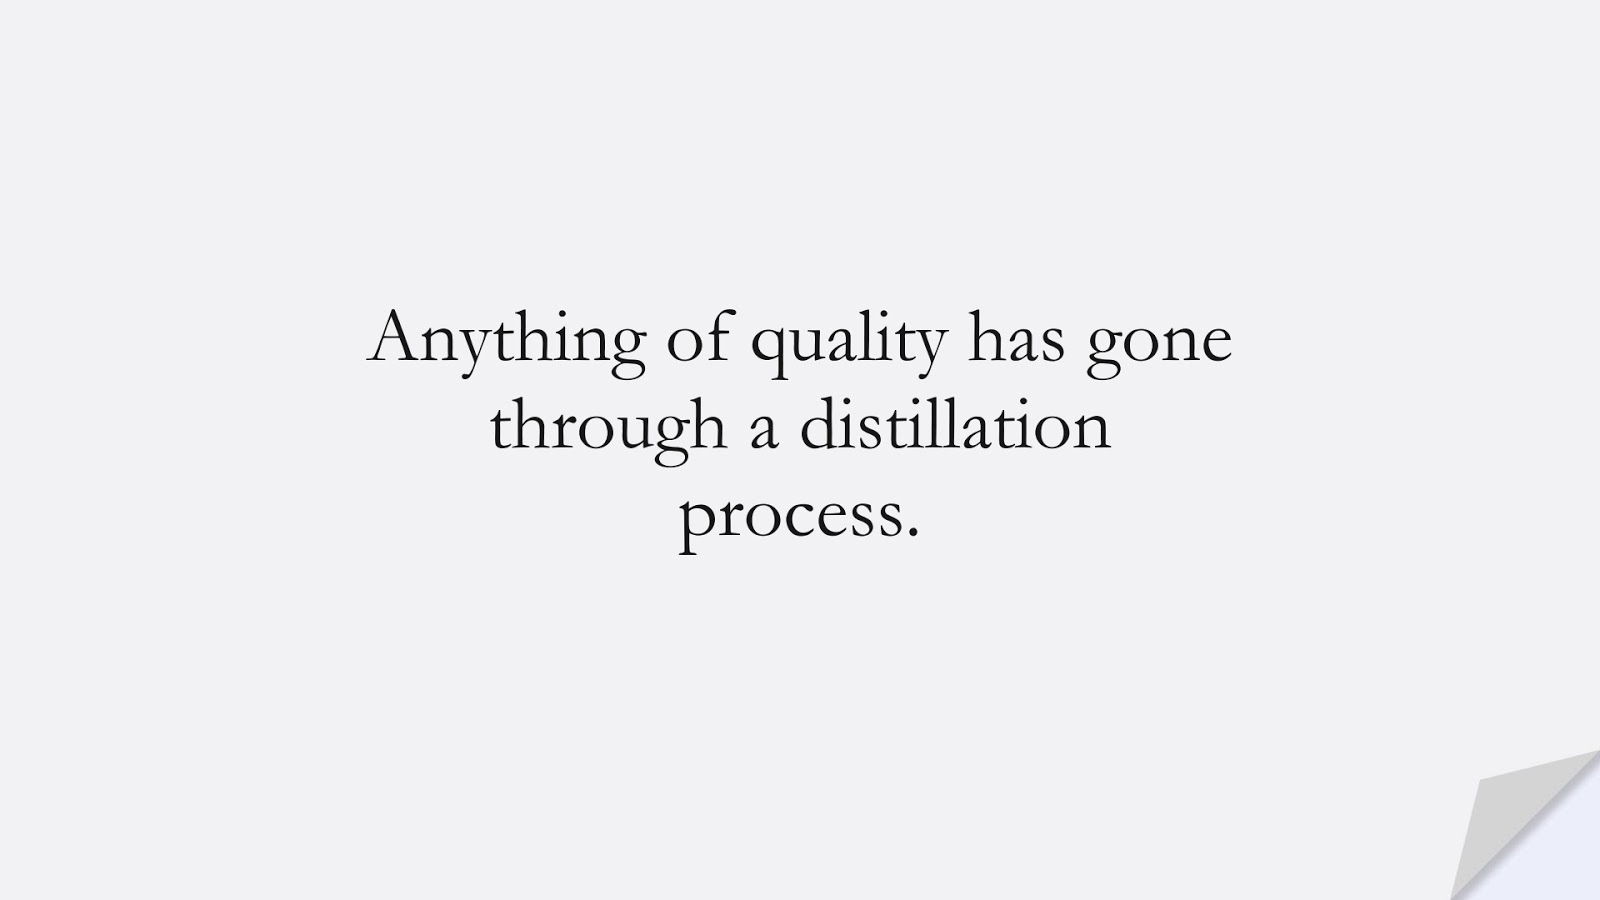 Anything of quality has gone through a distillation process.FALSE